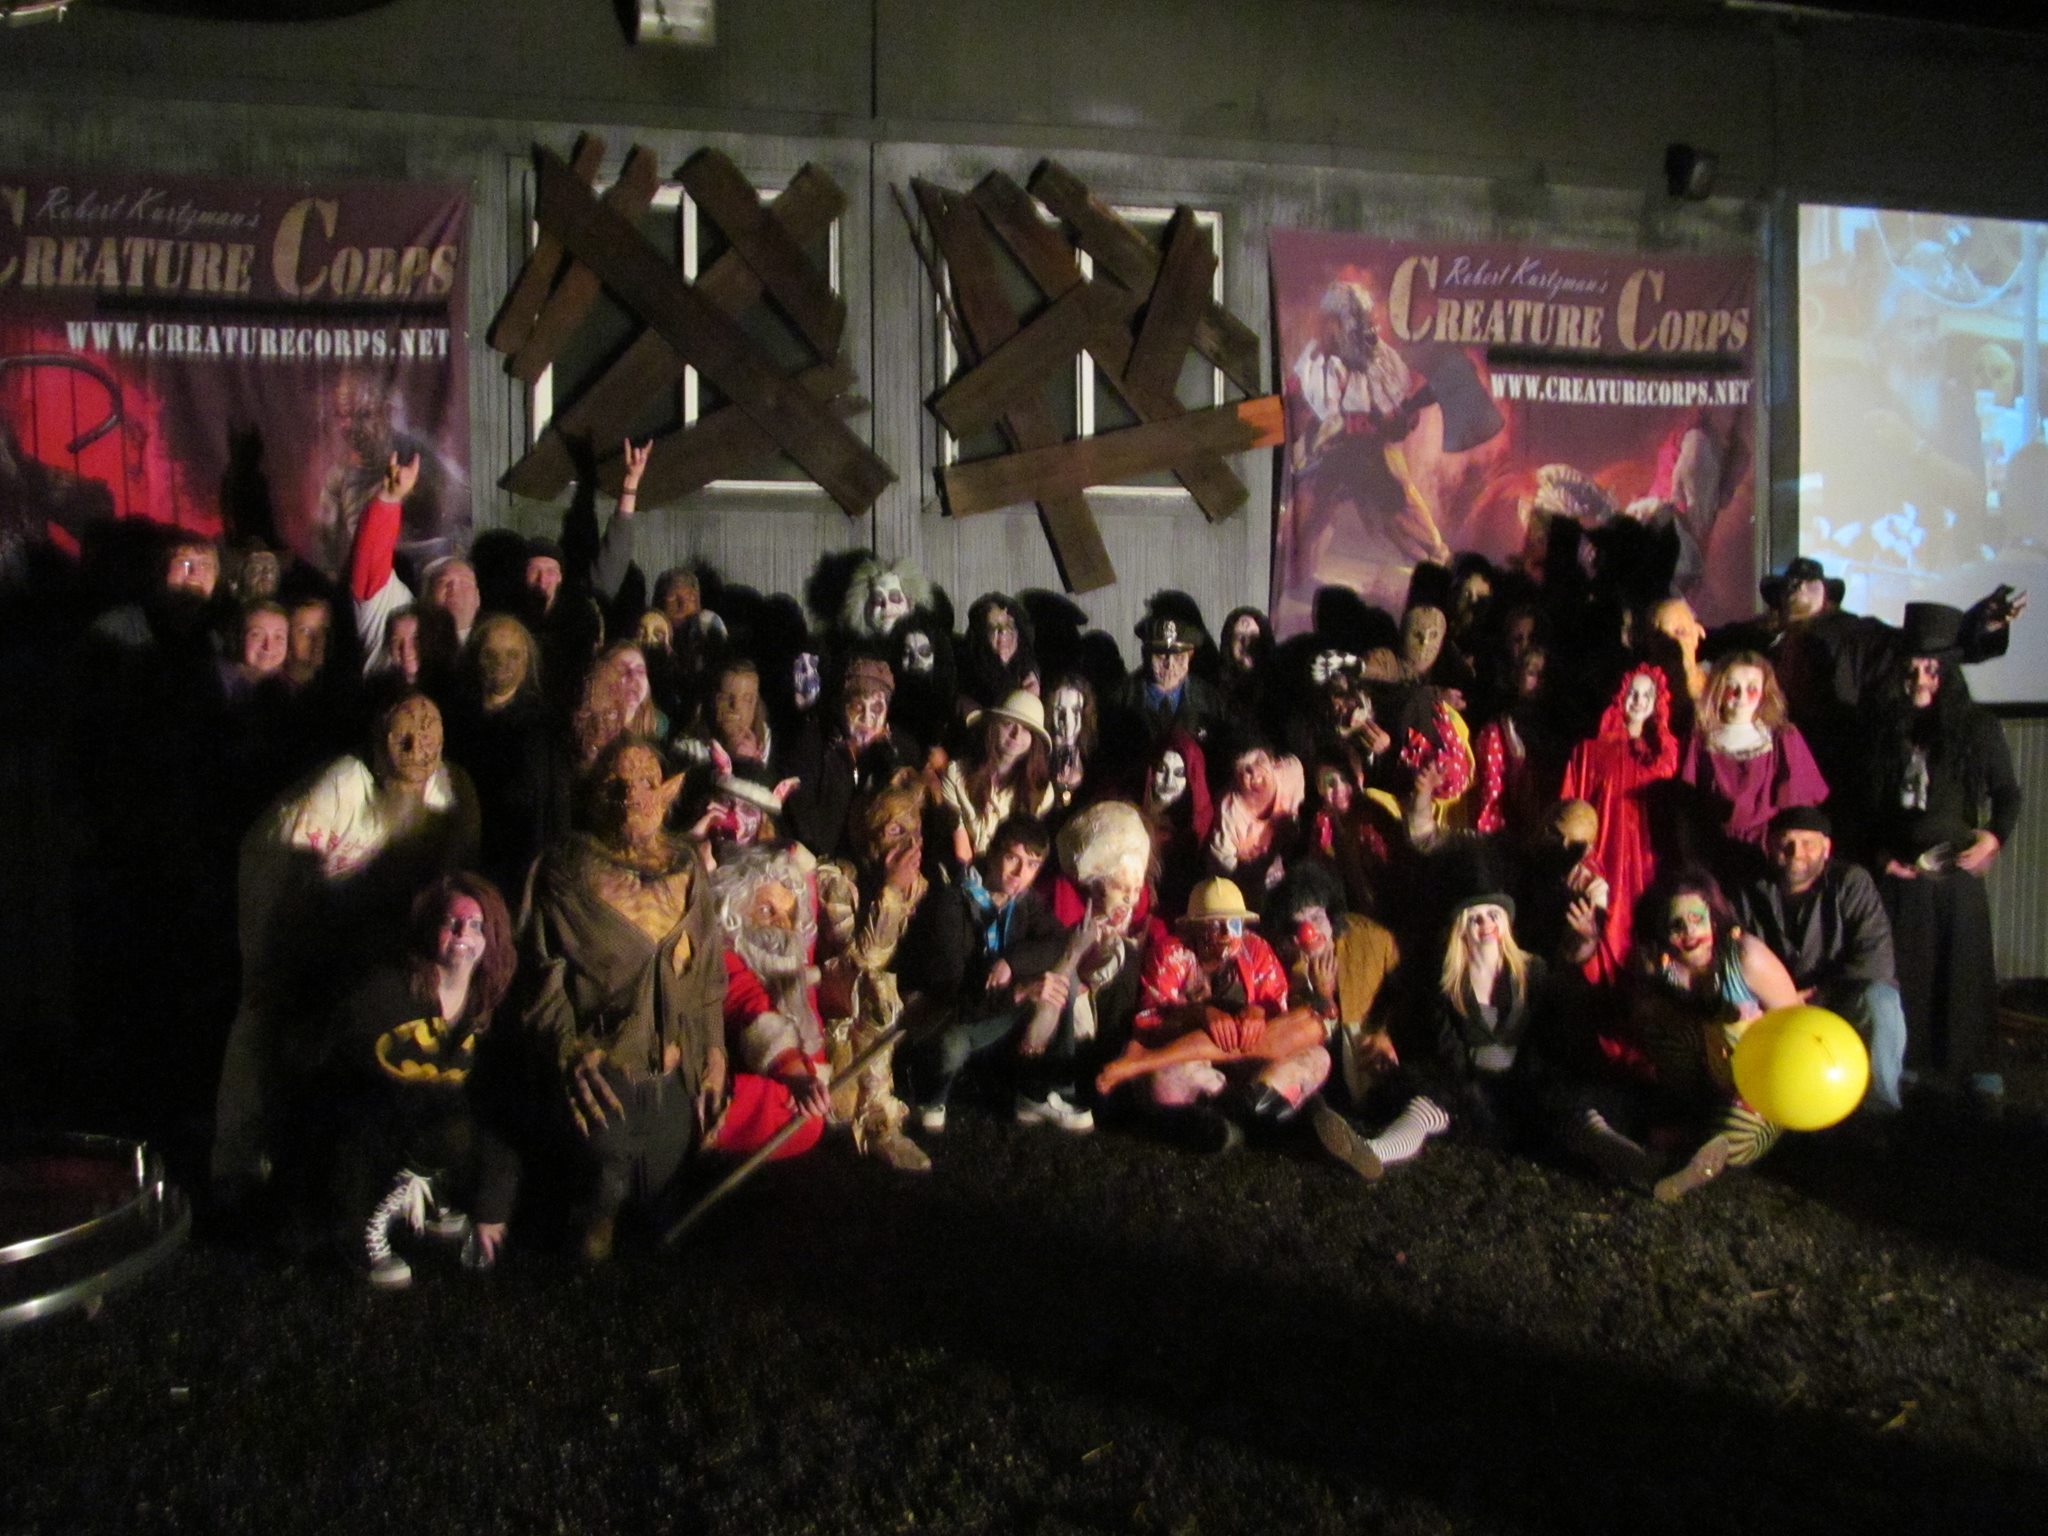 Cast on final day of Robert Kurtzman's Mad FX Lab in Crestline, OH. I play Beetlejuice (top row center). November 2, 2013.